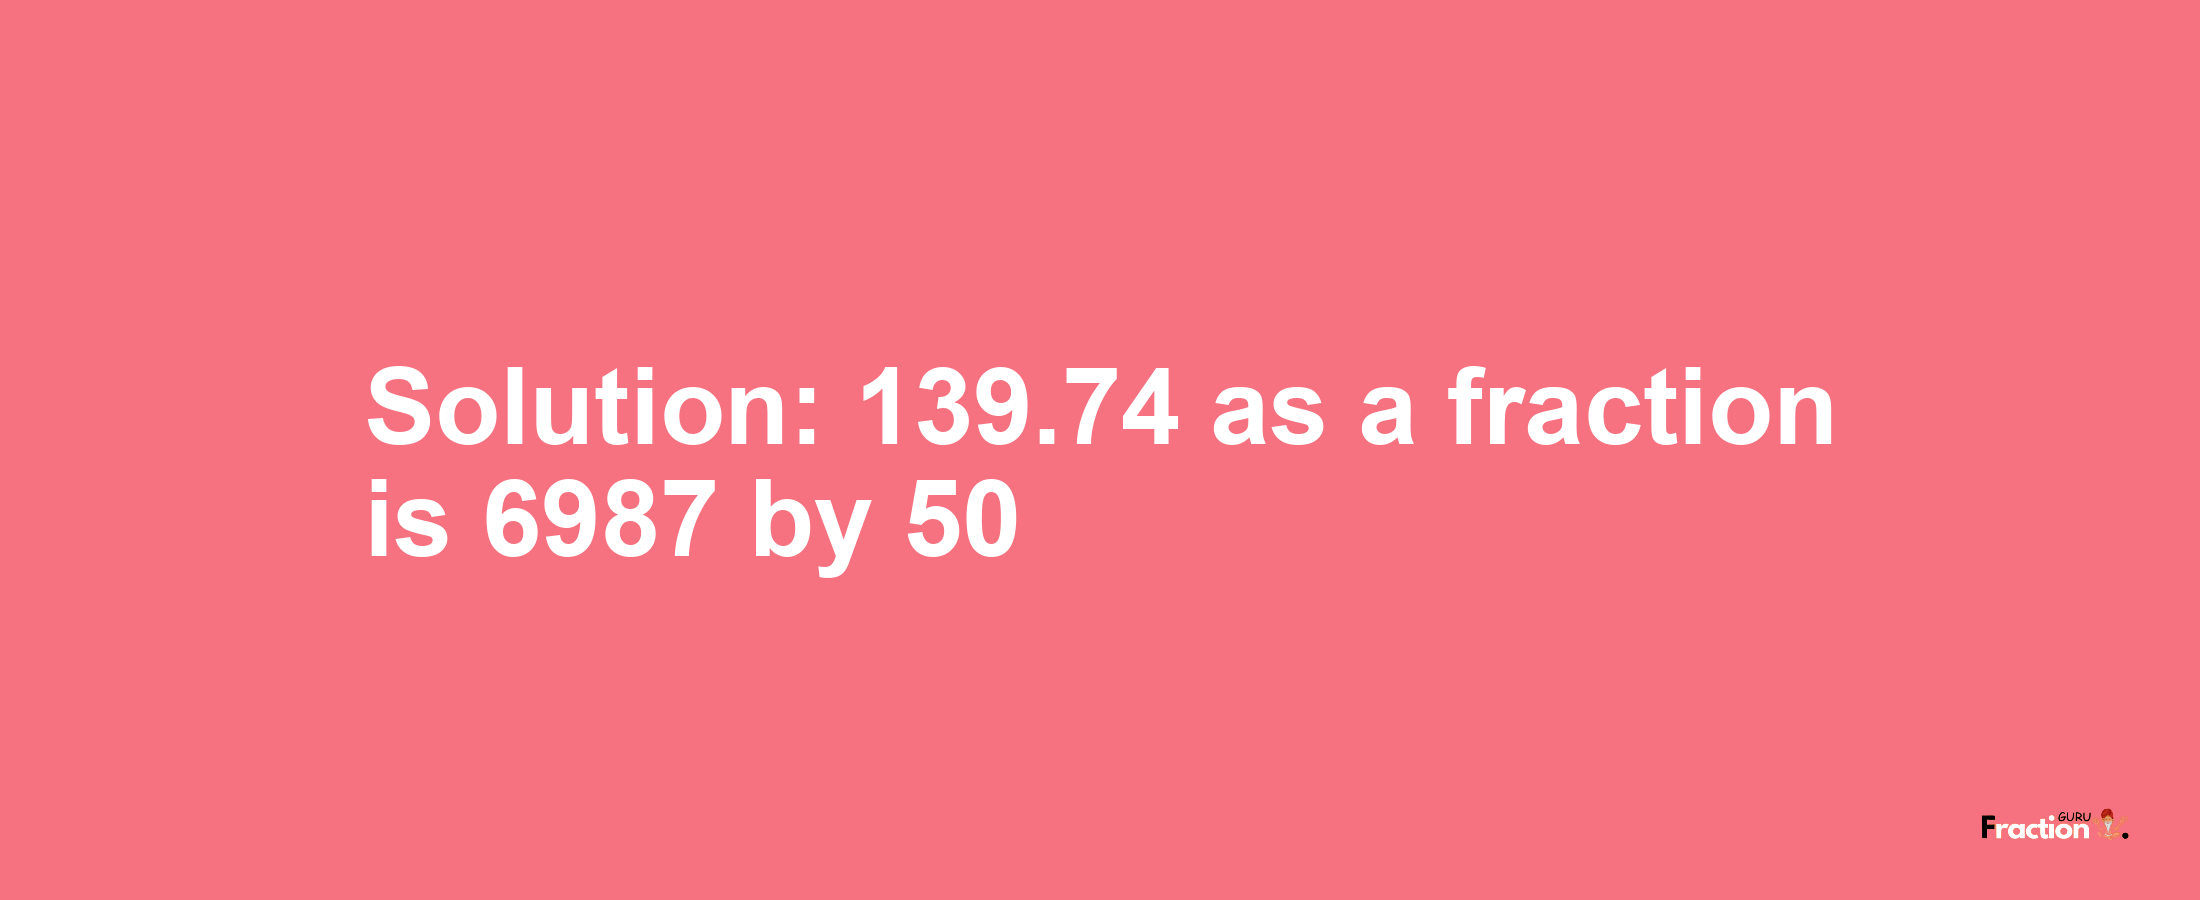 Solution:139.74 as a fraction is 6987/50